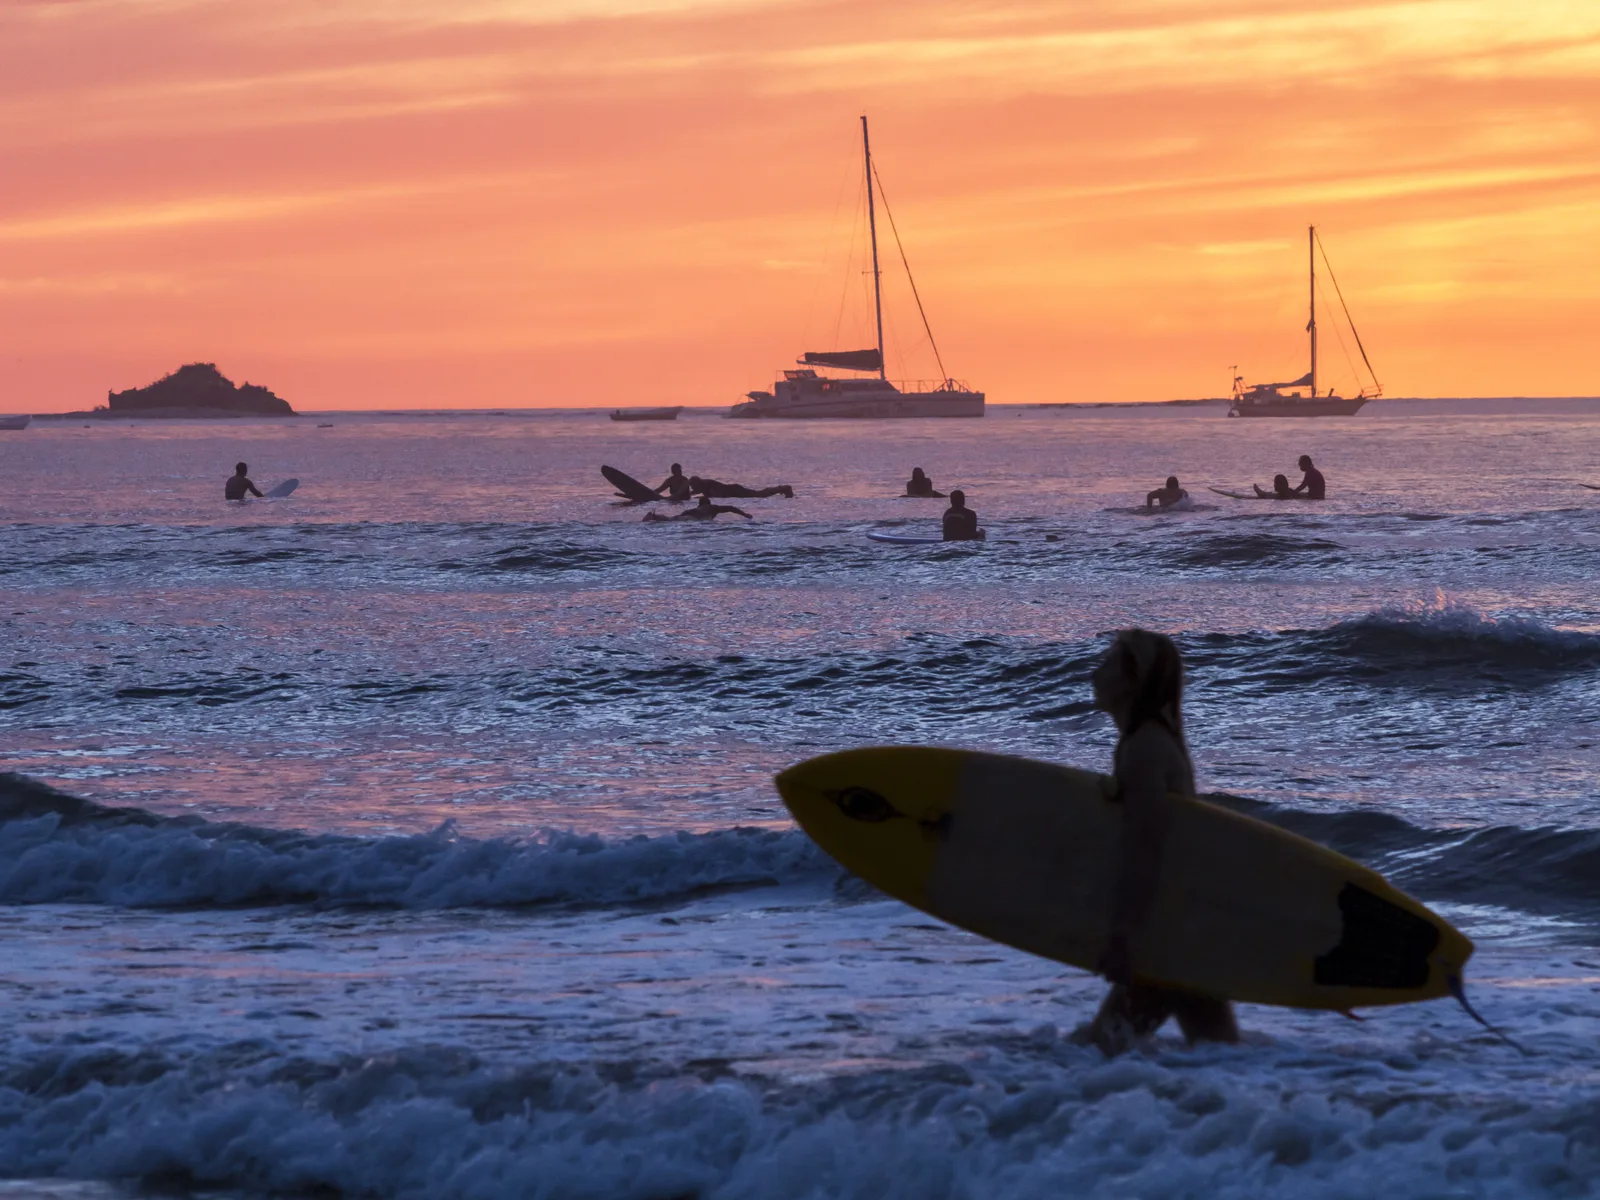 Silhouette of boats and surfers paddling during the sweet sunset at Tamarindo Beach, a piece on the best beaches in Costa Rica